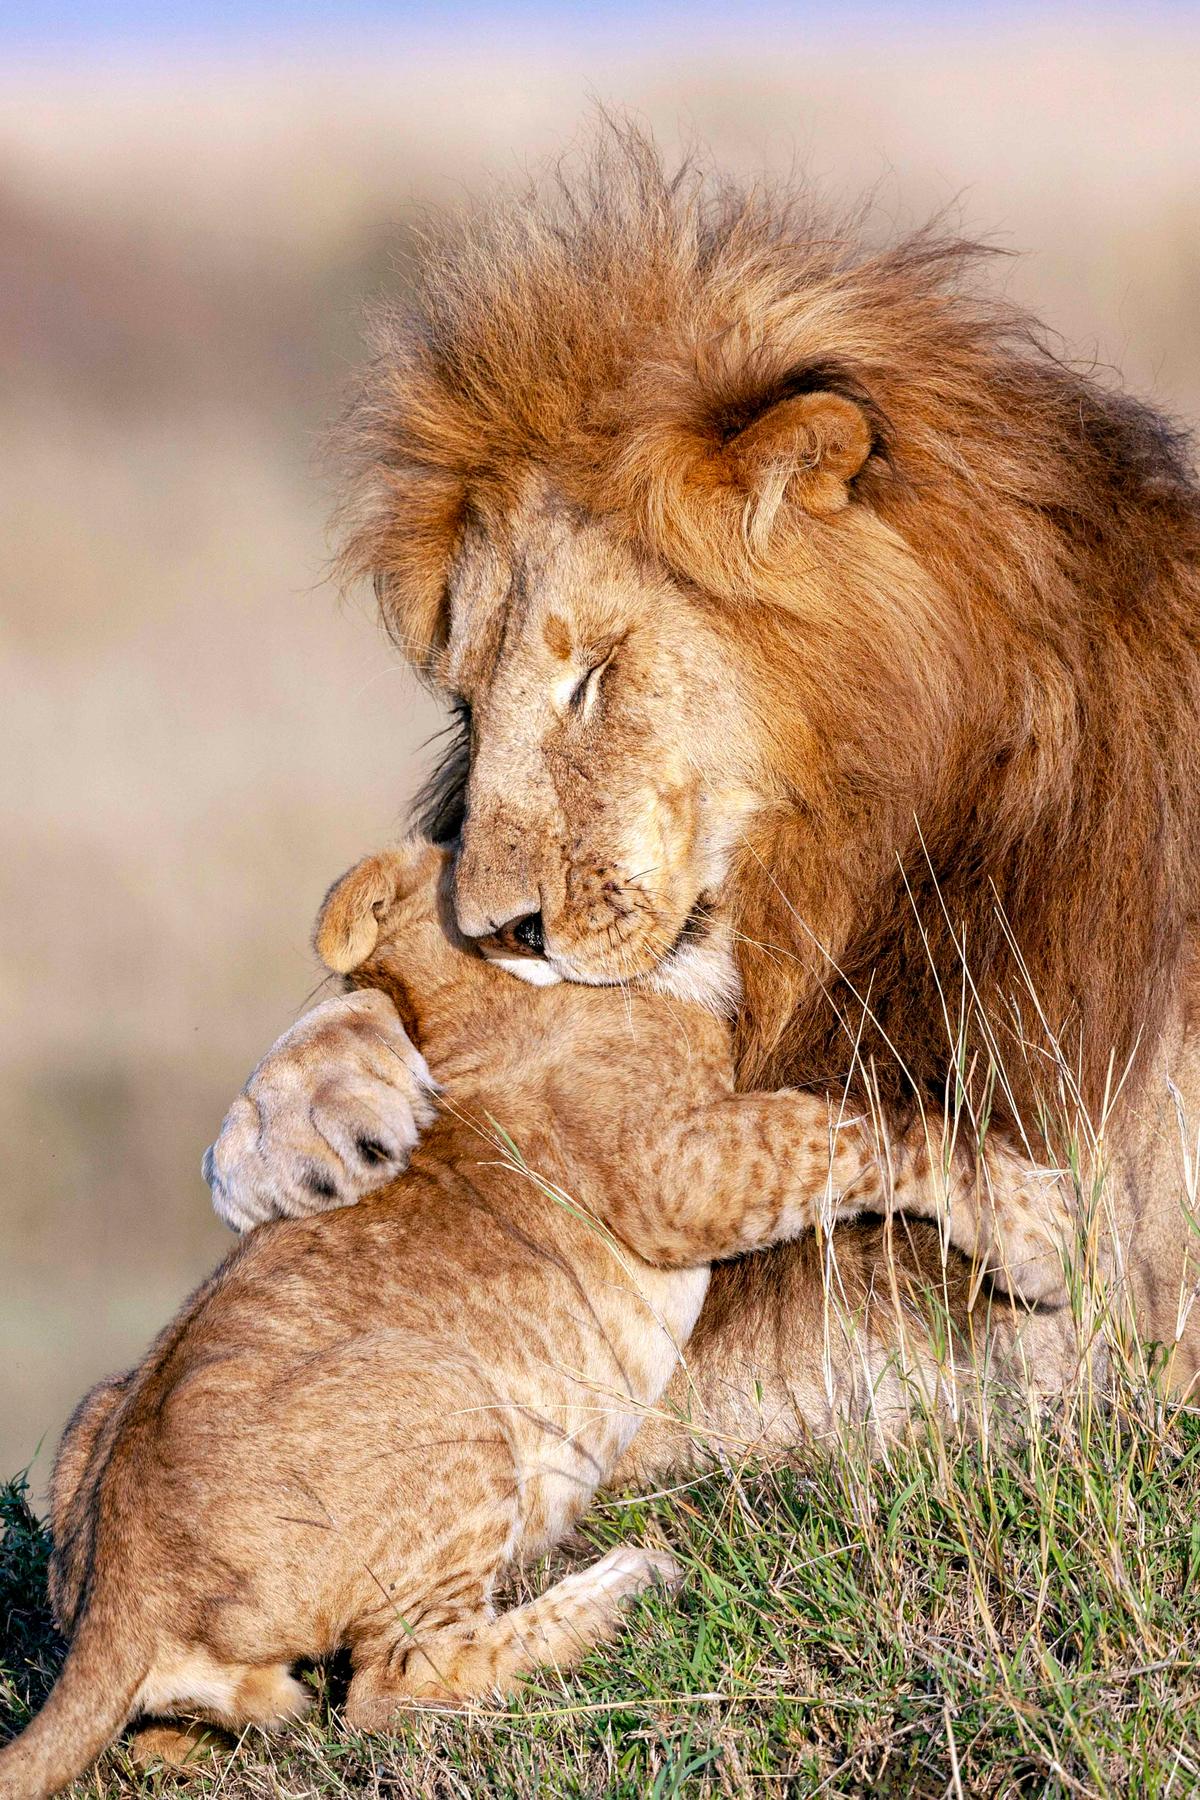 A baby lion and his dad in the Maasai Mara National Park, Kenya. (Caters News)